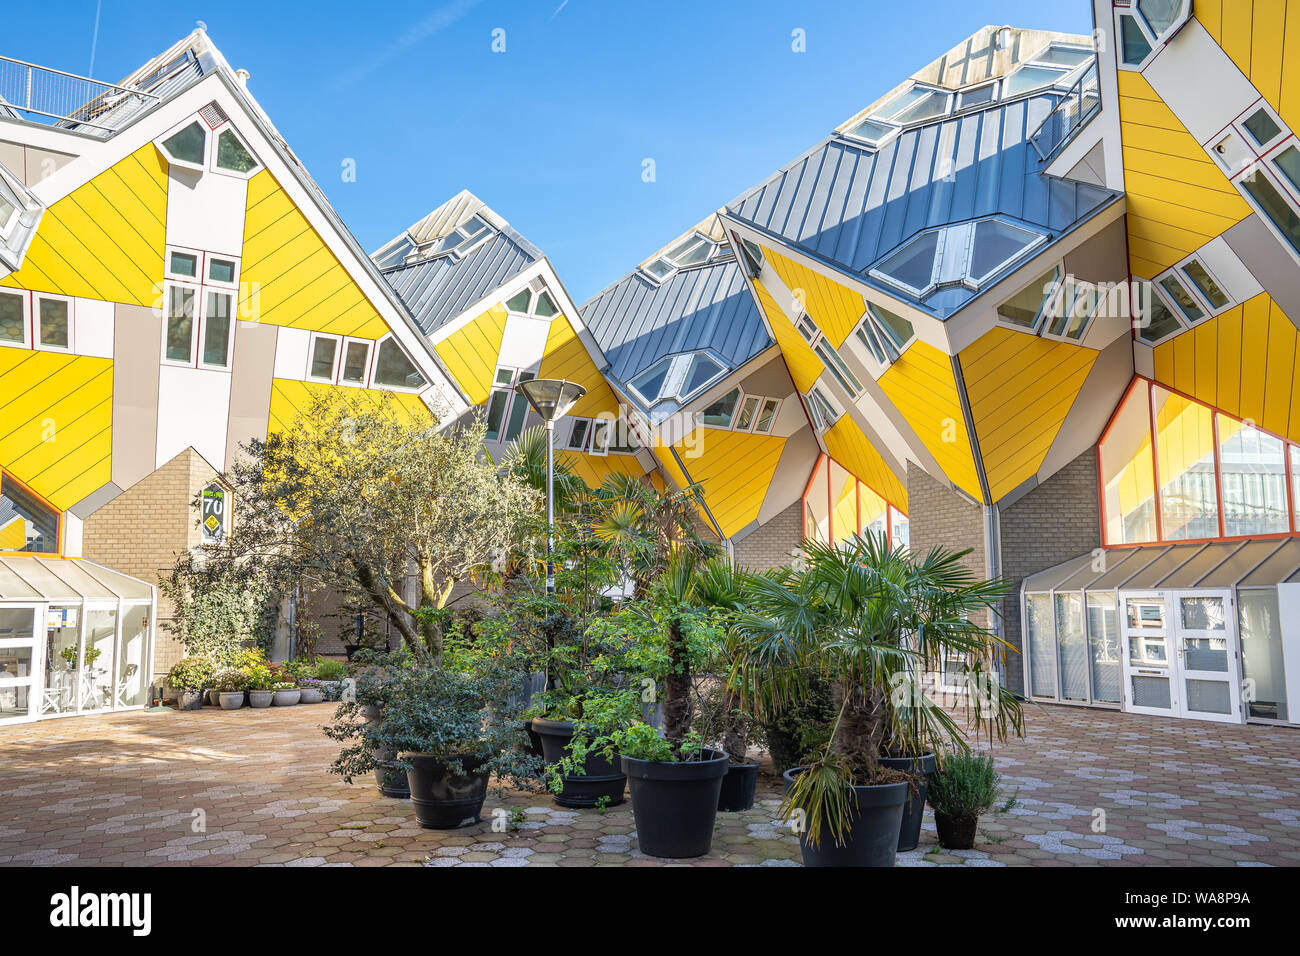 Rotterdam, Netherlands - May 13, 2019: Cube House are a set of innovative houses built in Rotterdam, Netherlands Stock Photo